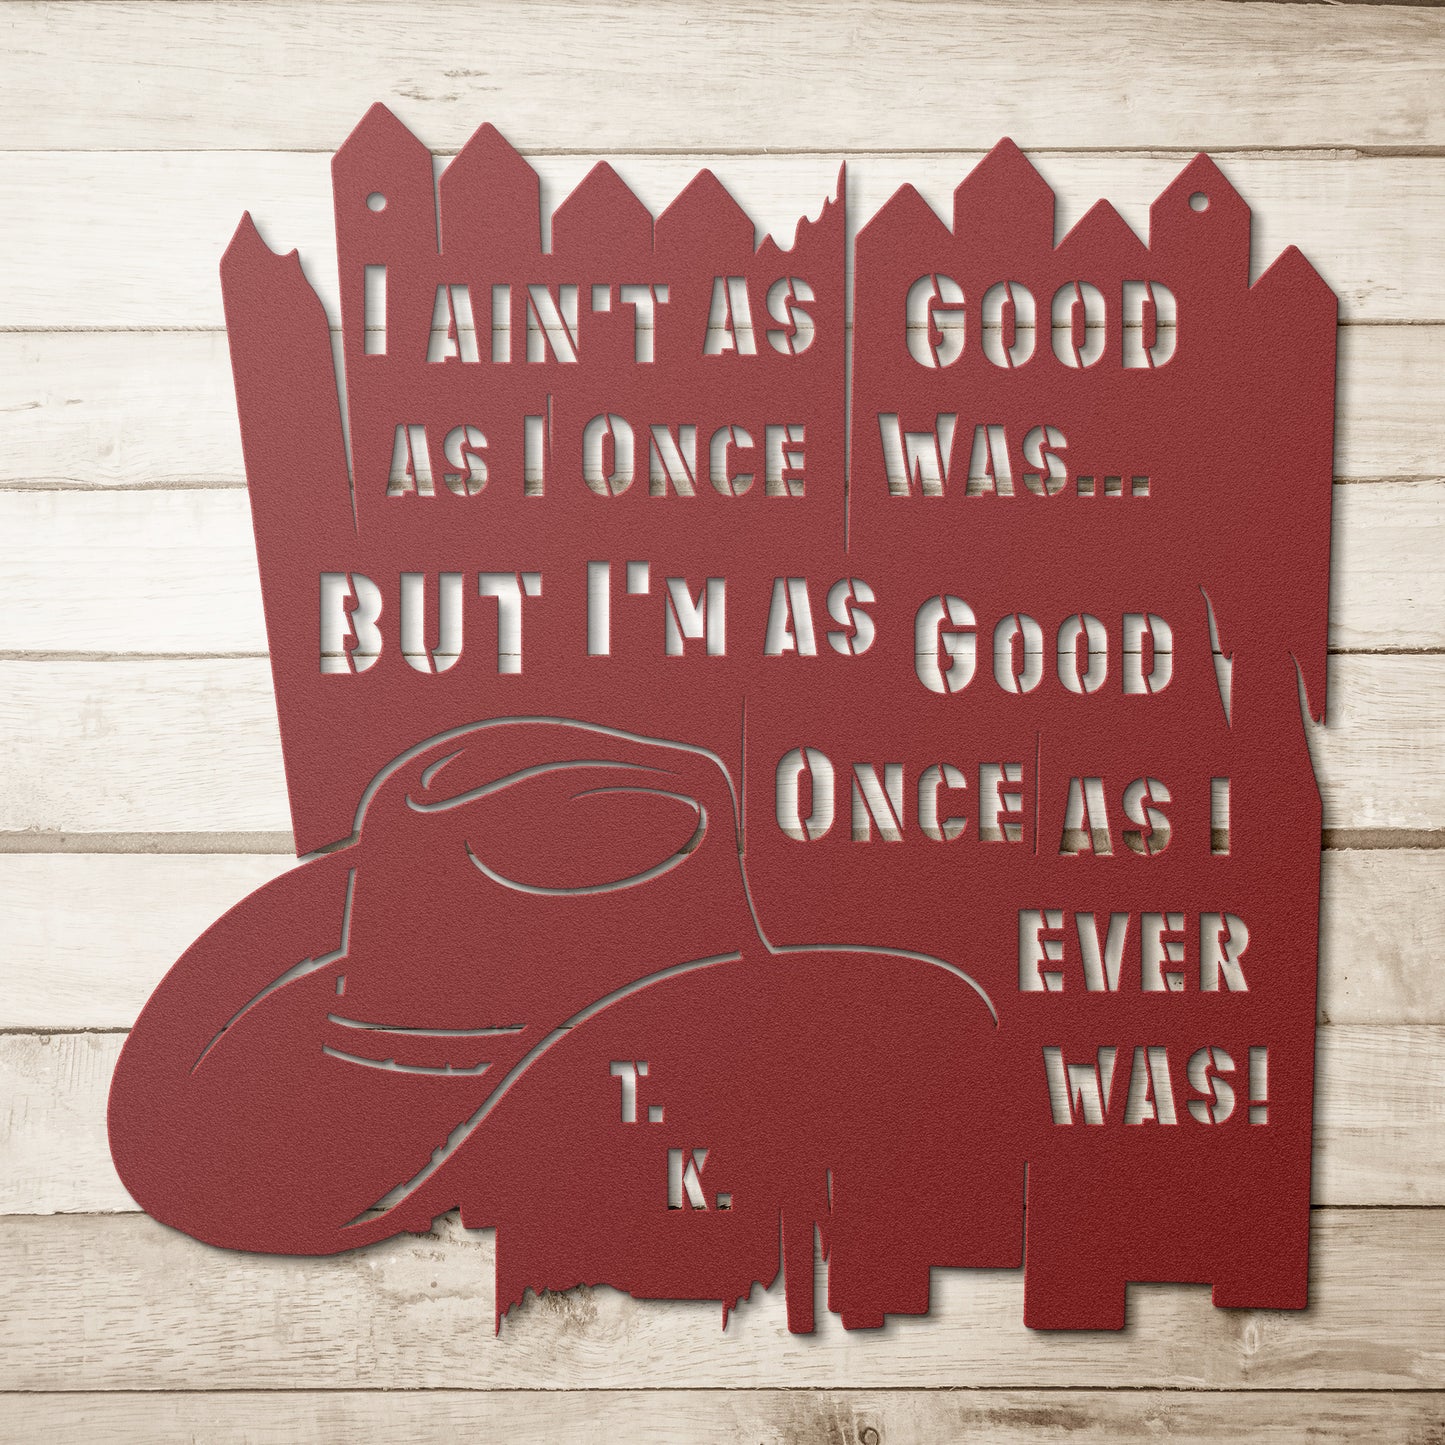 Rest in Peace Toby Keith Tribute Metal Wall Art